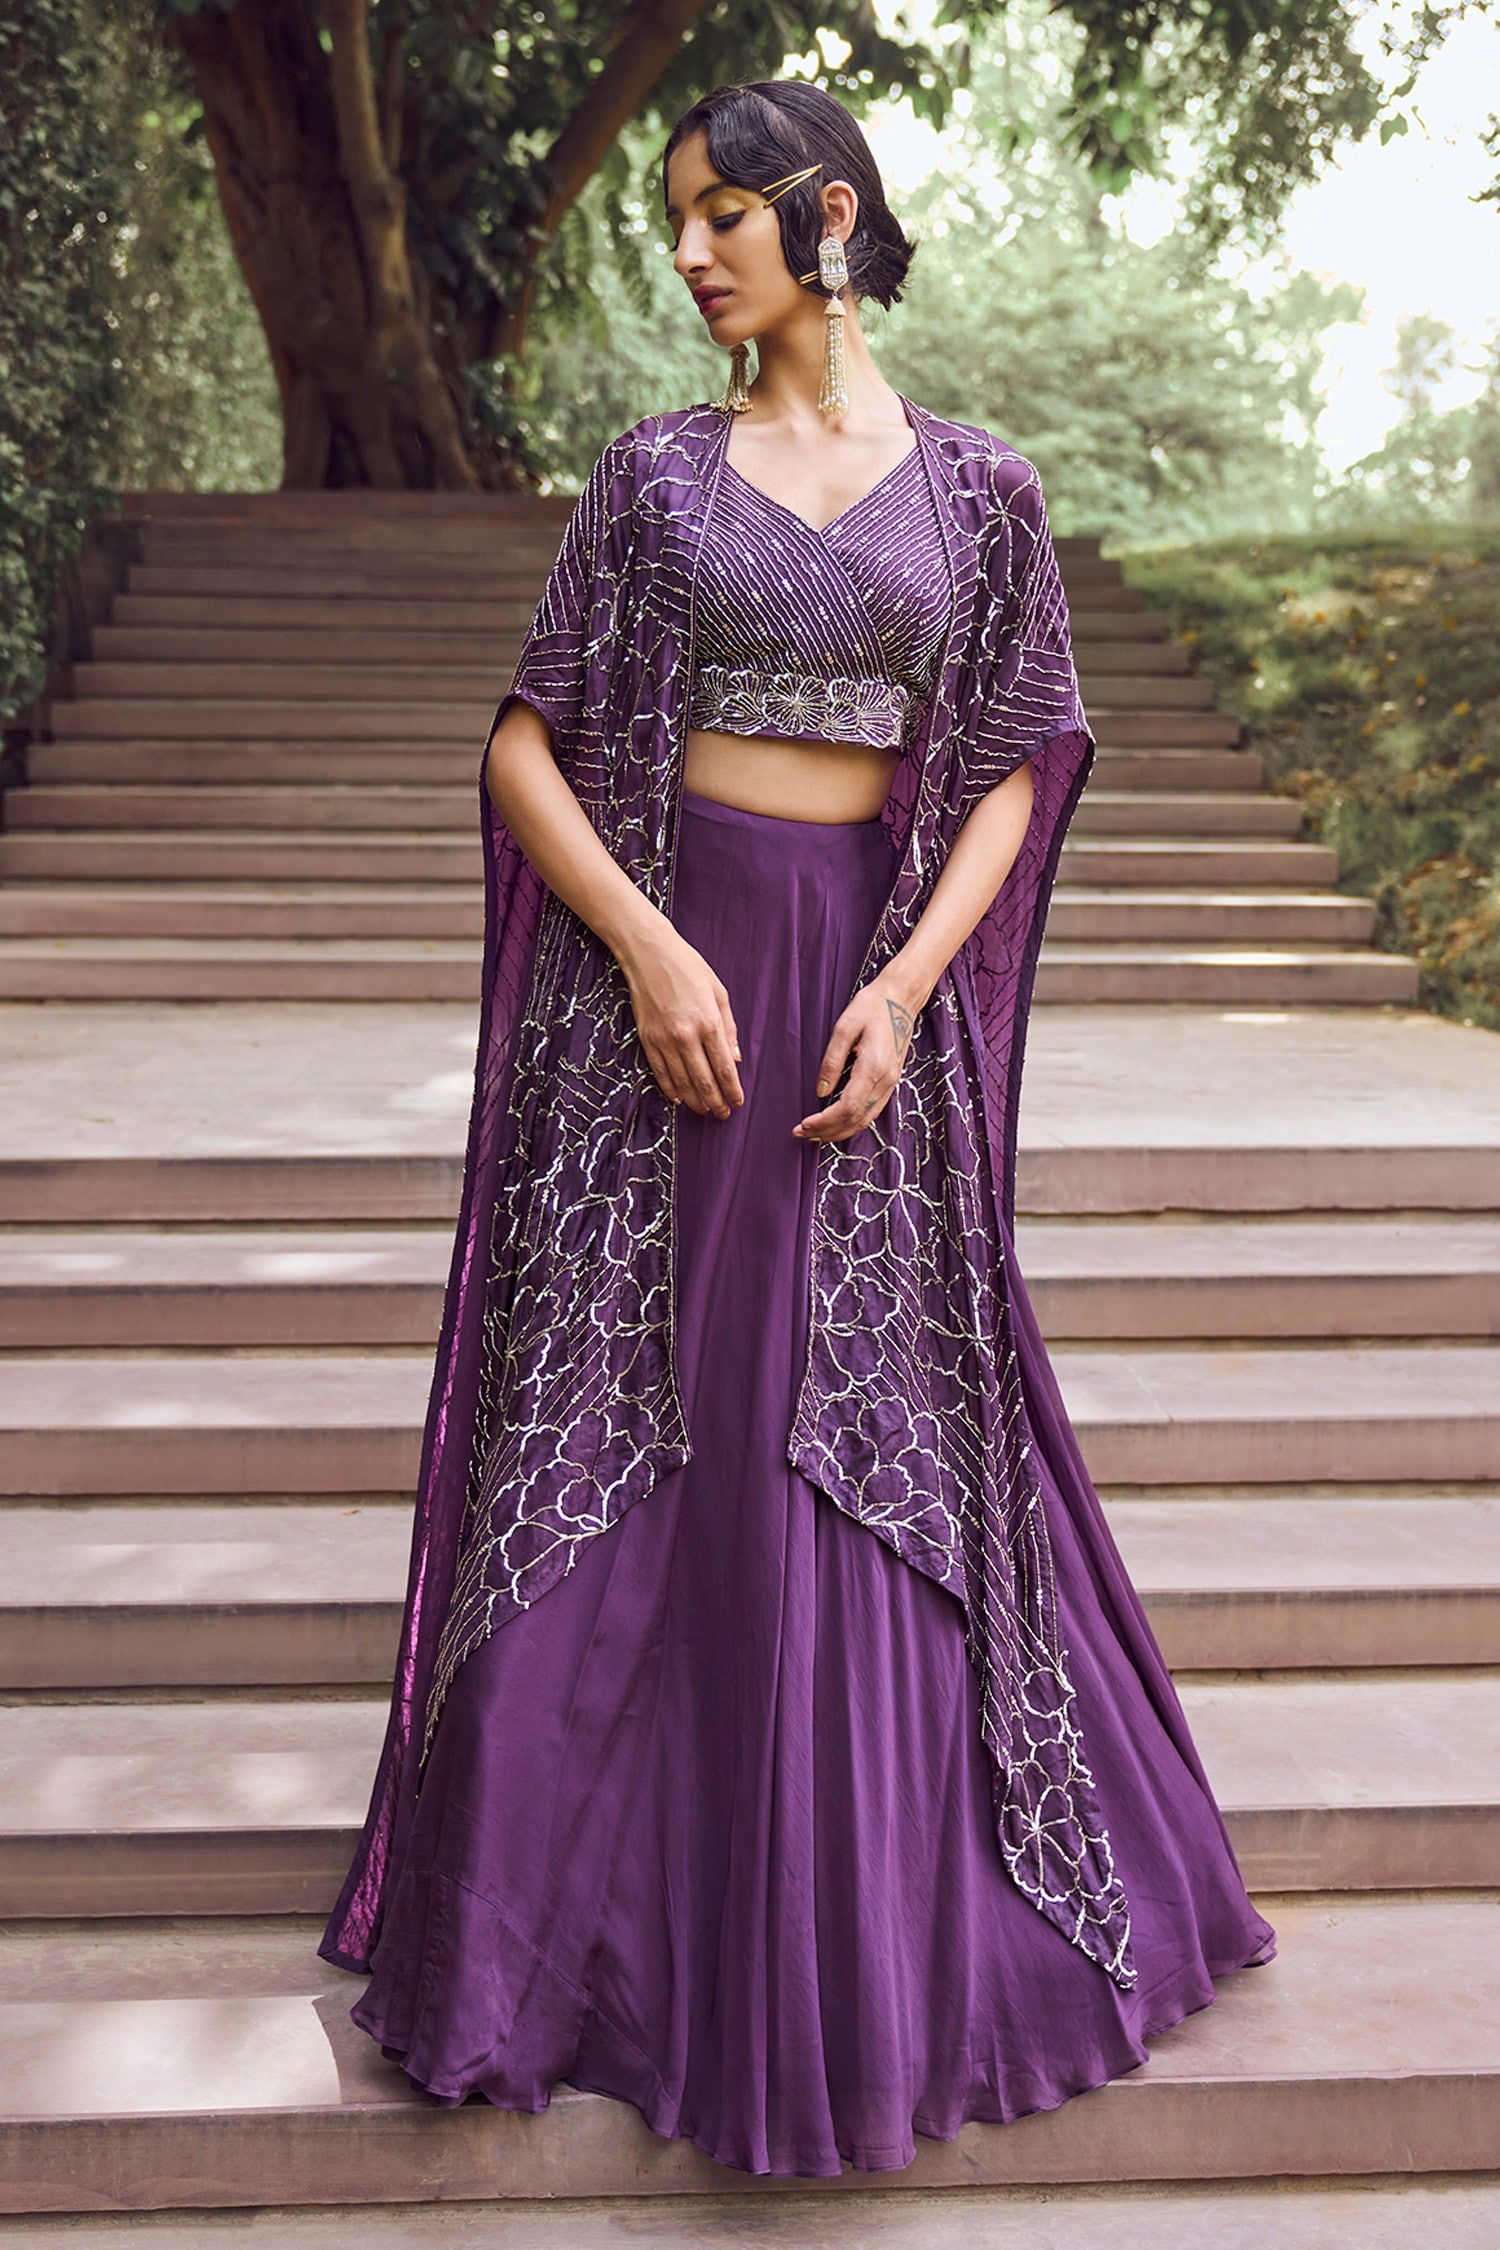 Which is the Best Place to Buy Designer Lehenga Choli in USA Online?